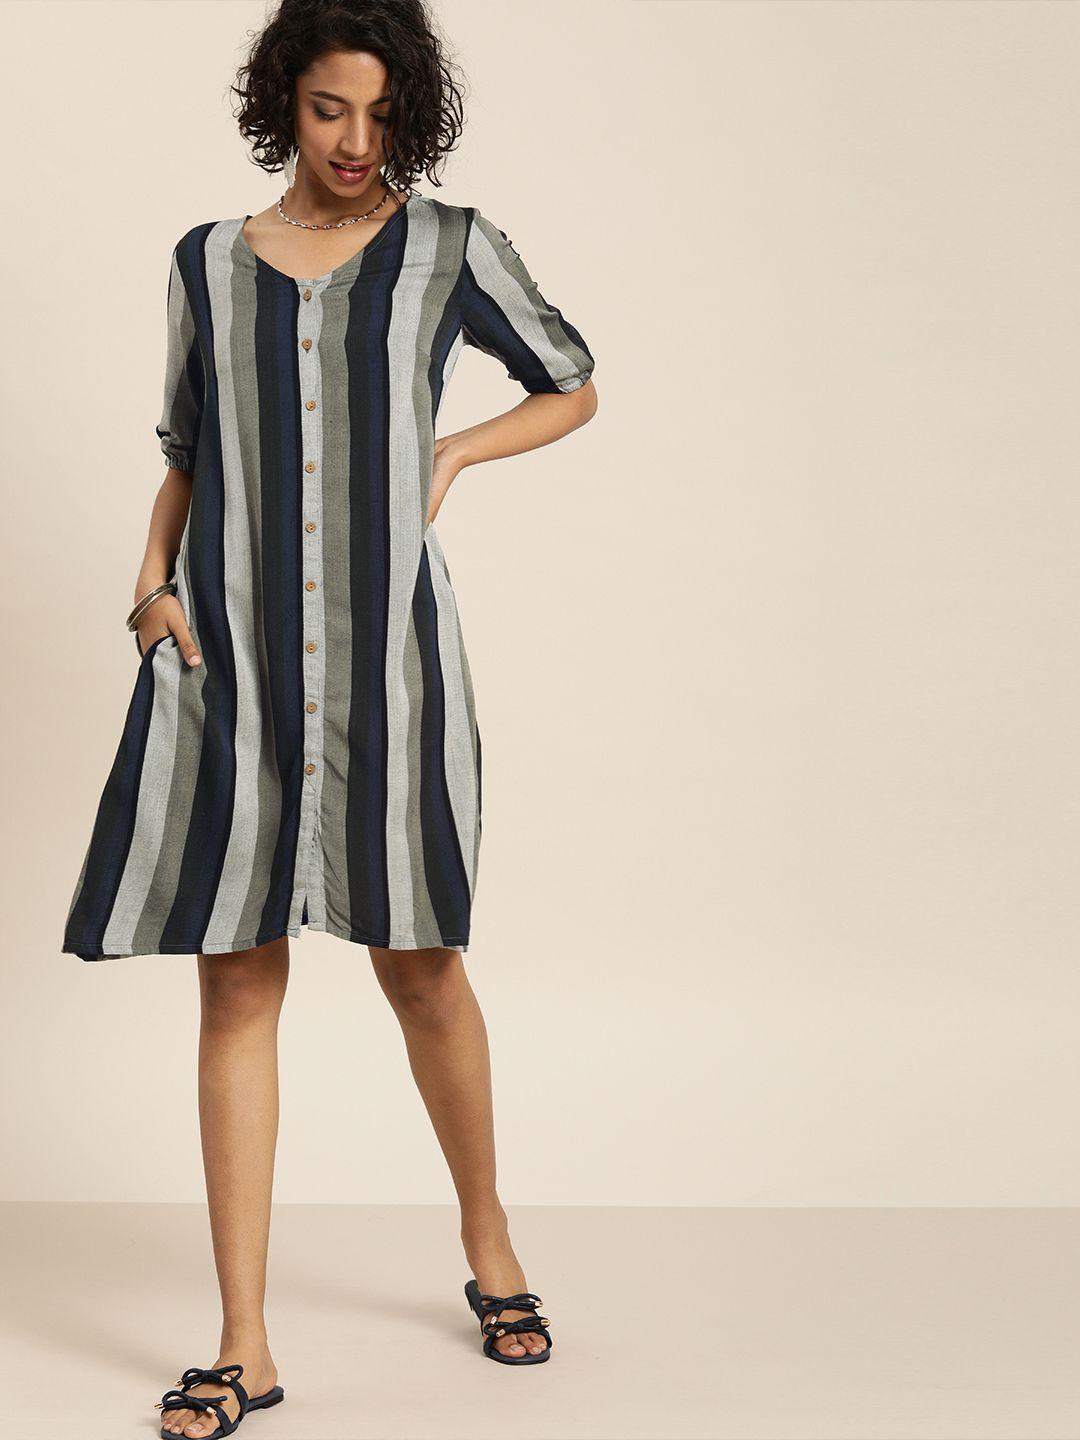 taavi women grey & navy blue striped woven legacy a-line sustainable dress with pockets